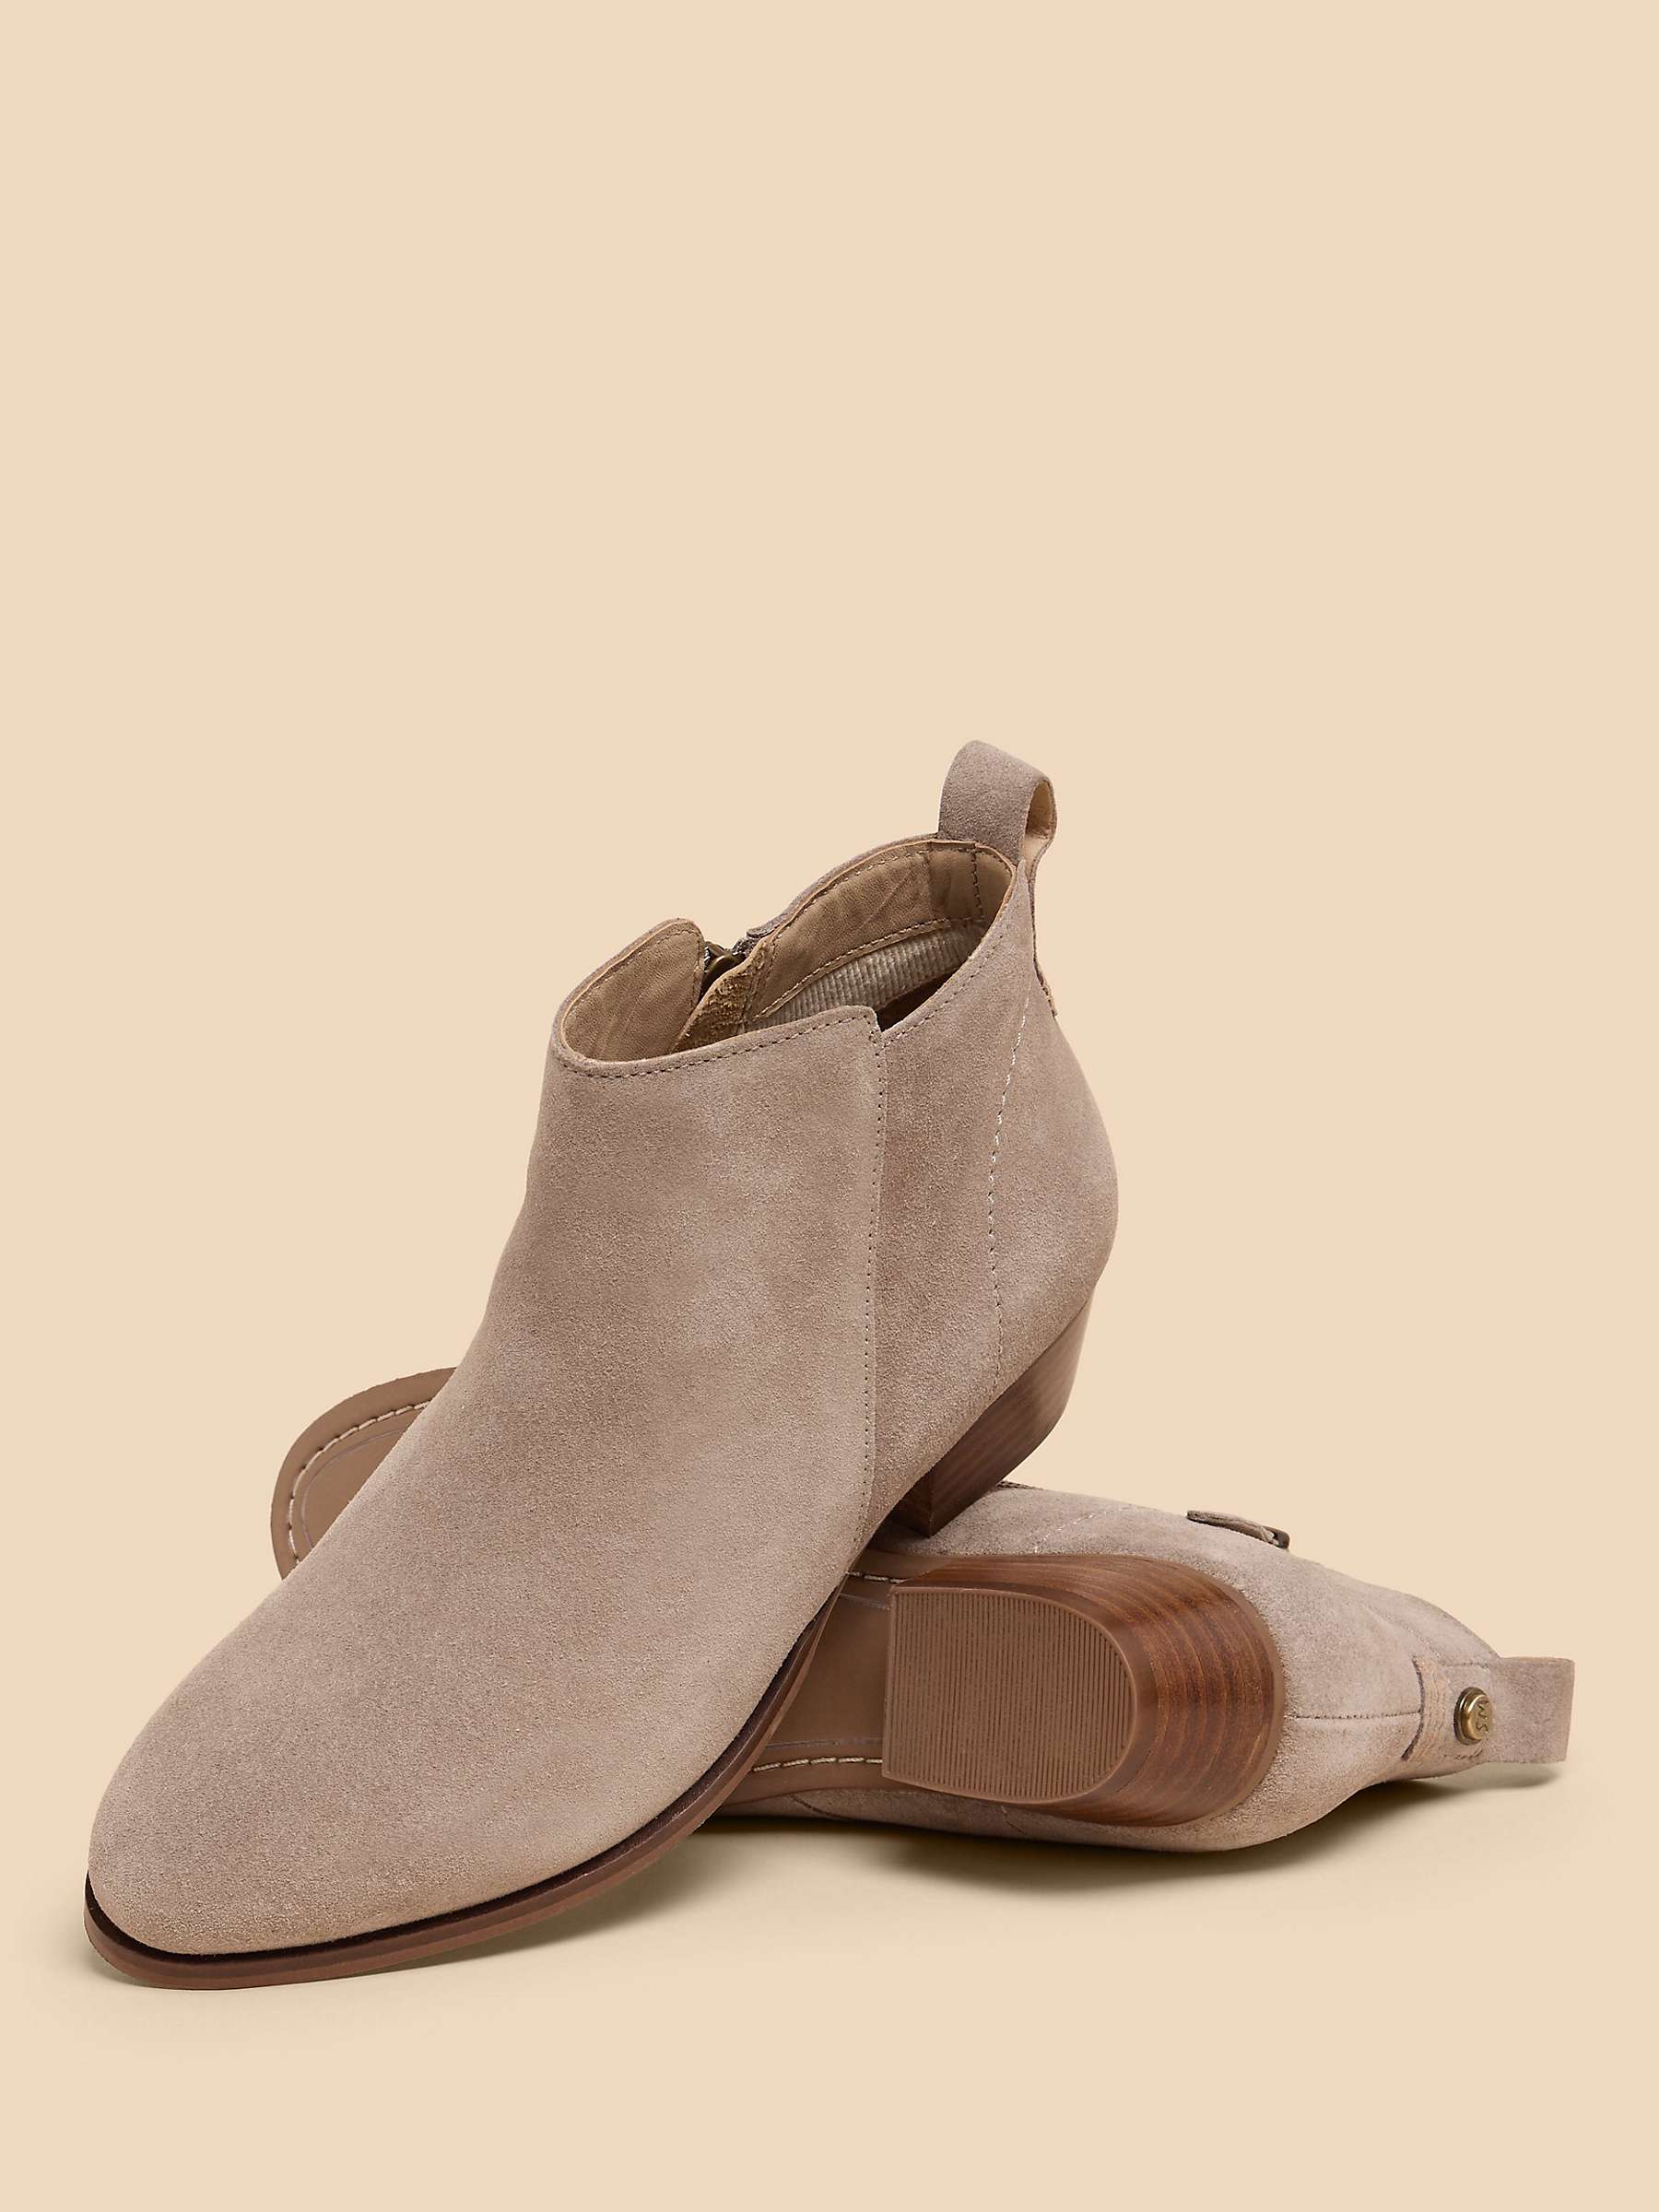 Buy White Stuff Suede Ankle Boots, Light Grey Online at johnlewis.com